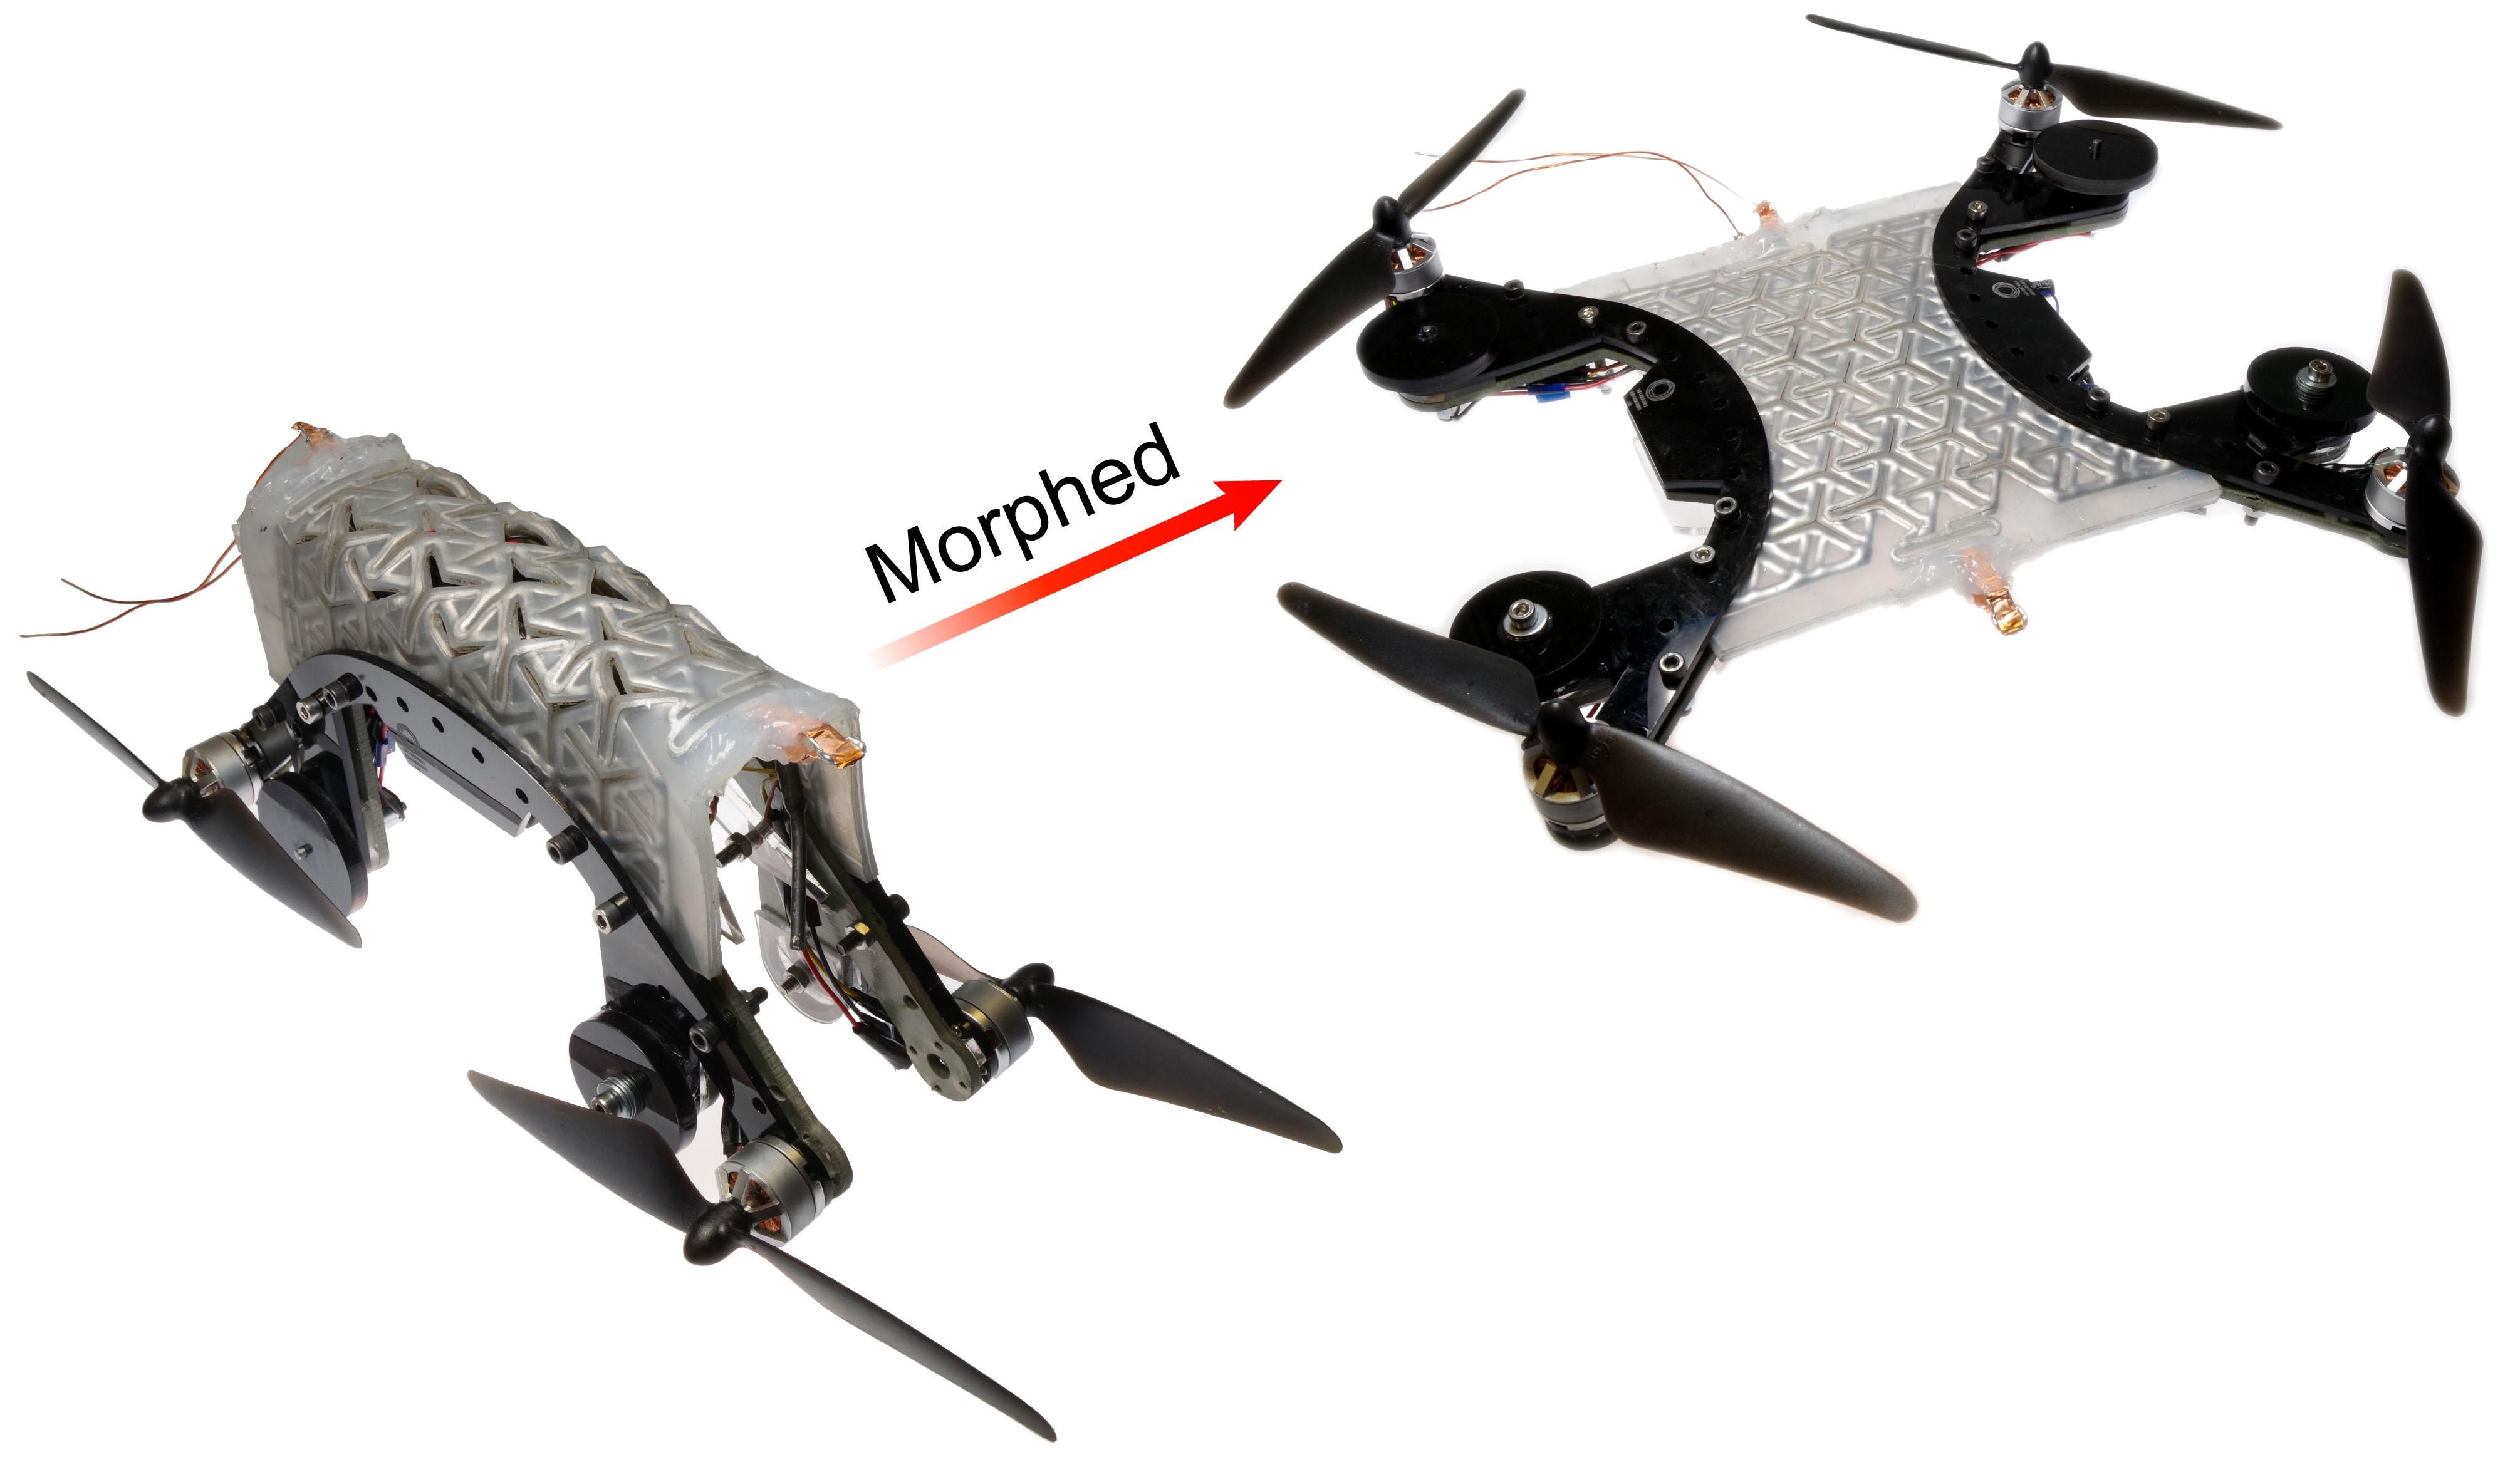 two-photos-of-a-small-flat-drone-on-left-it-is-folded-nearly-in-half-on-the-right-it-is-flat-and-ready-to-fly.jpg